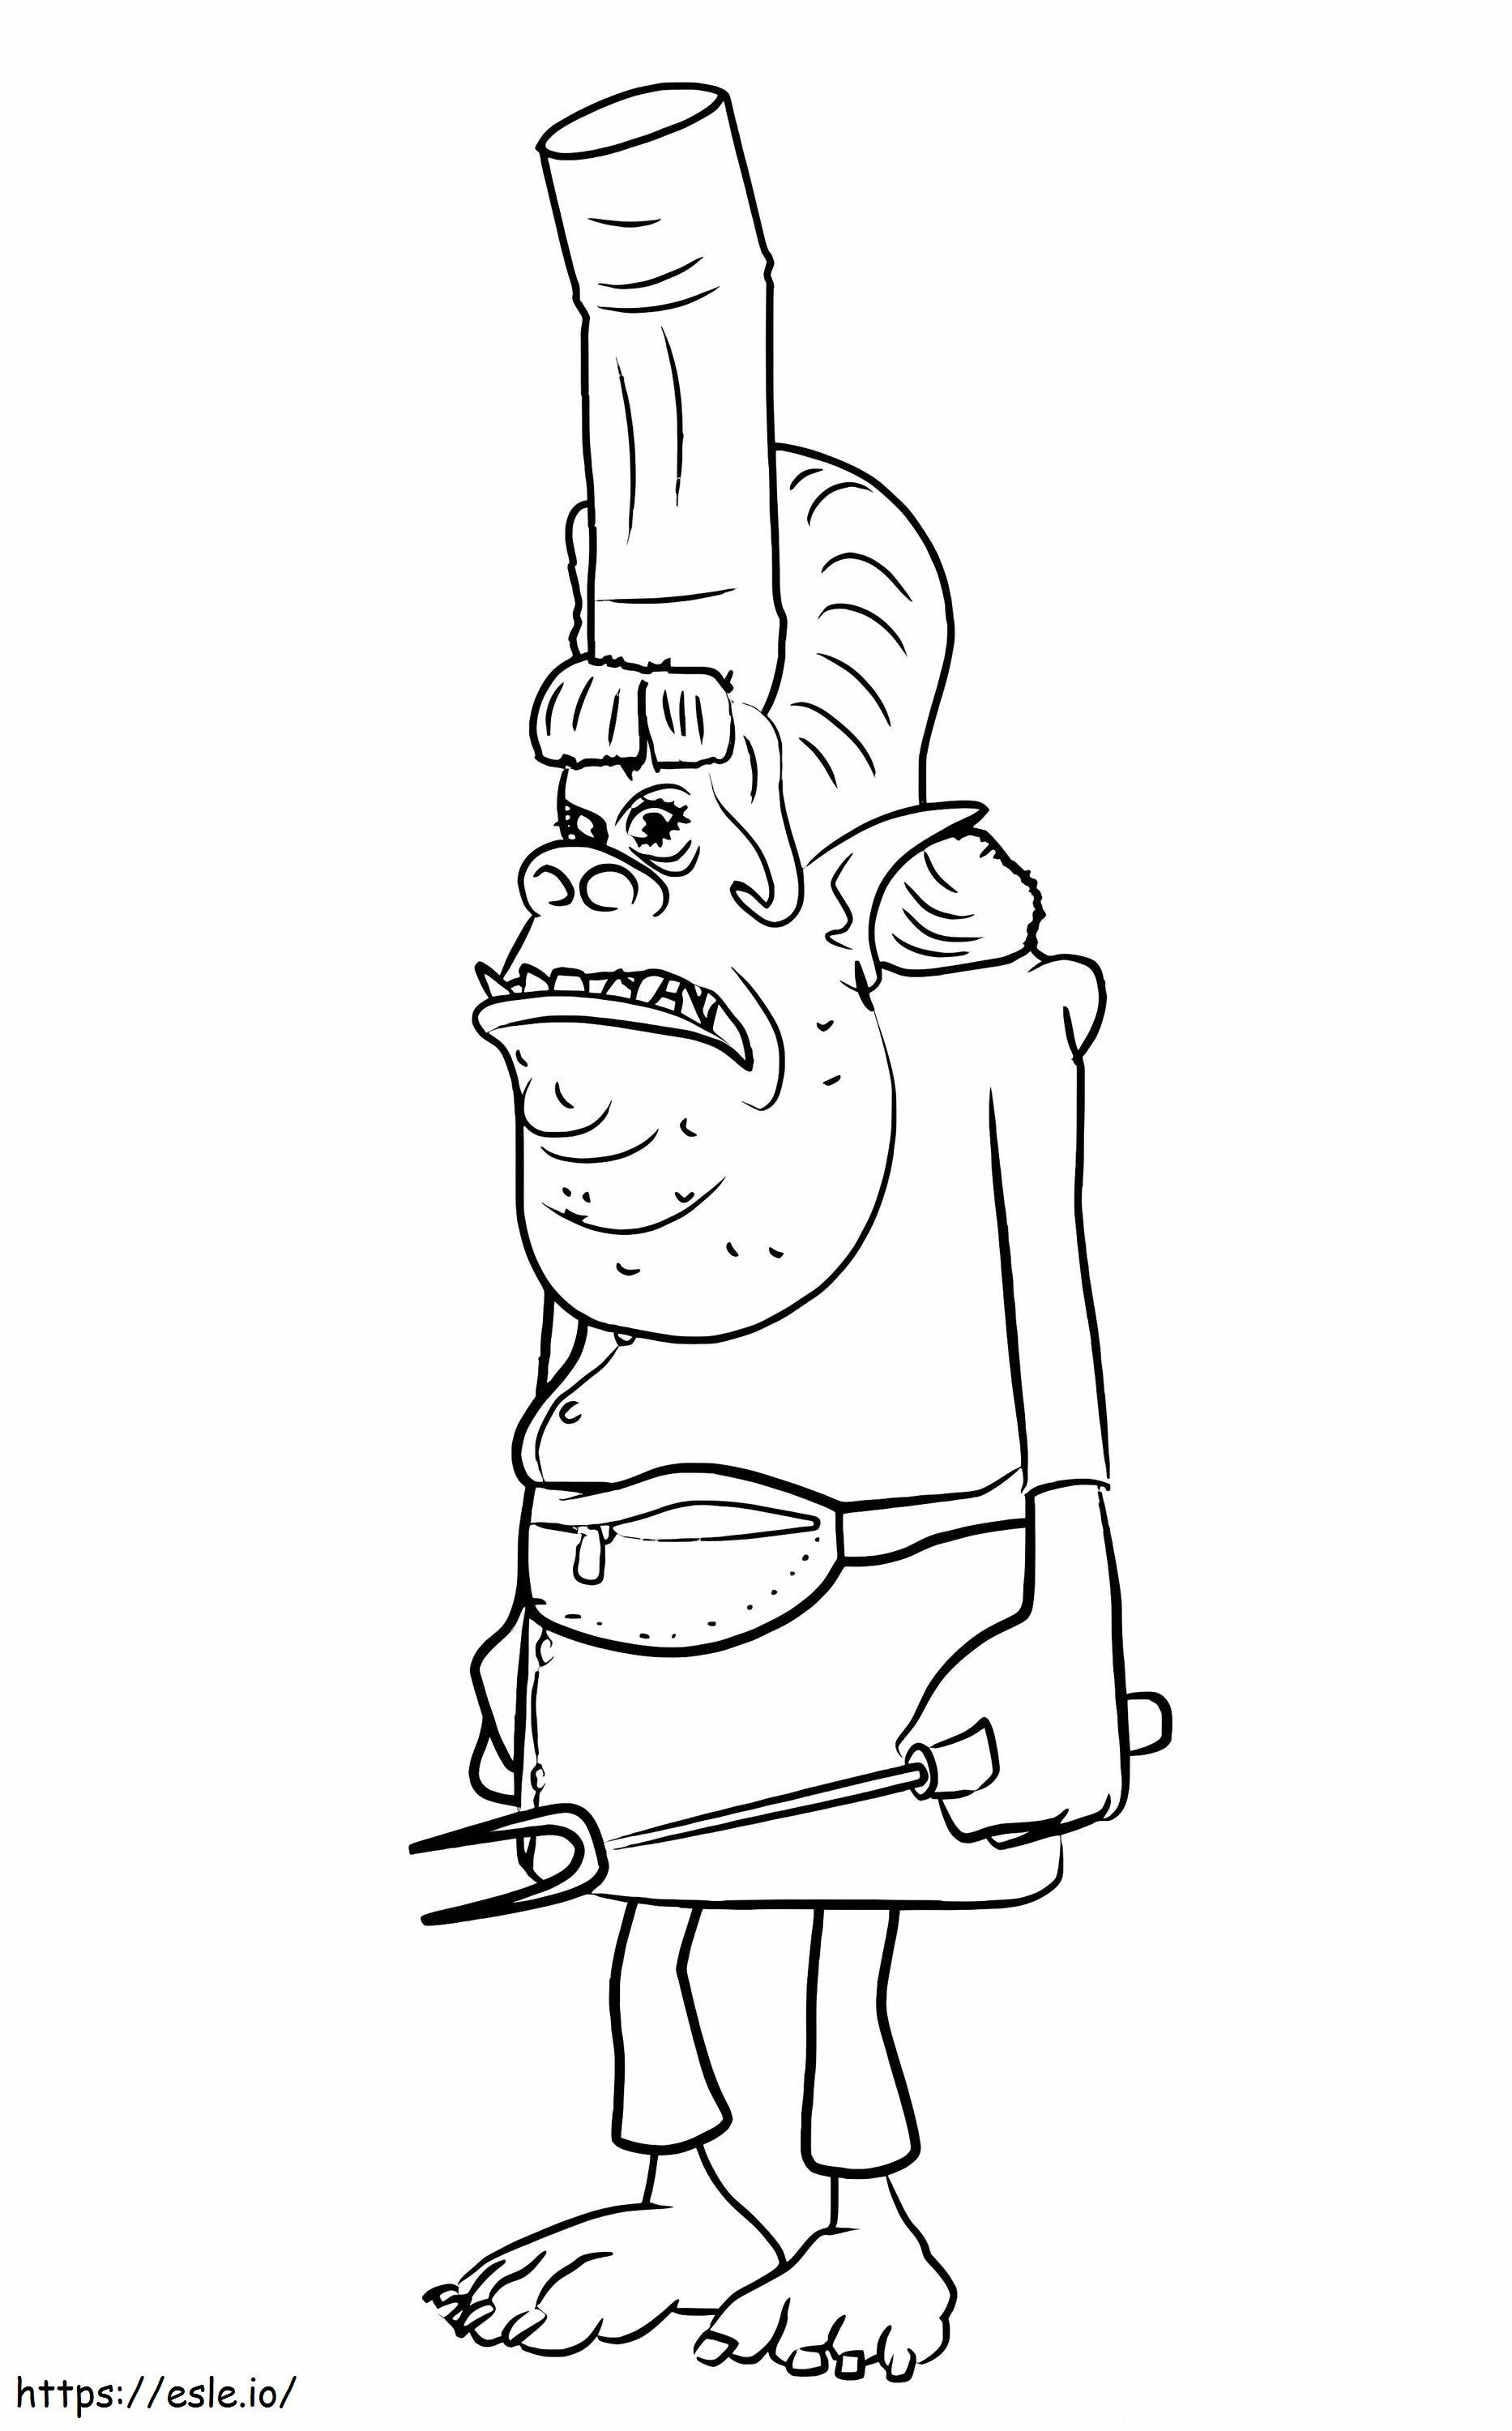 Trolls Chef Coloring Page coloring page